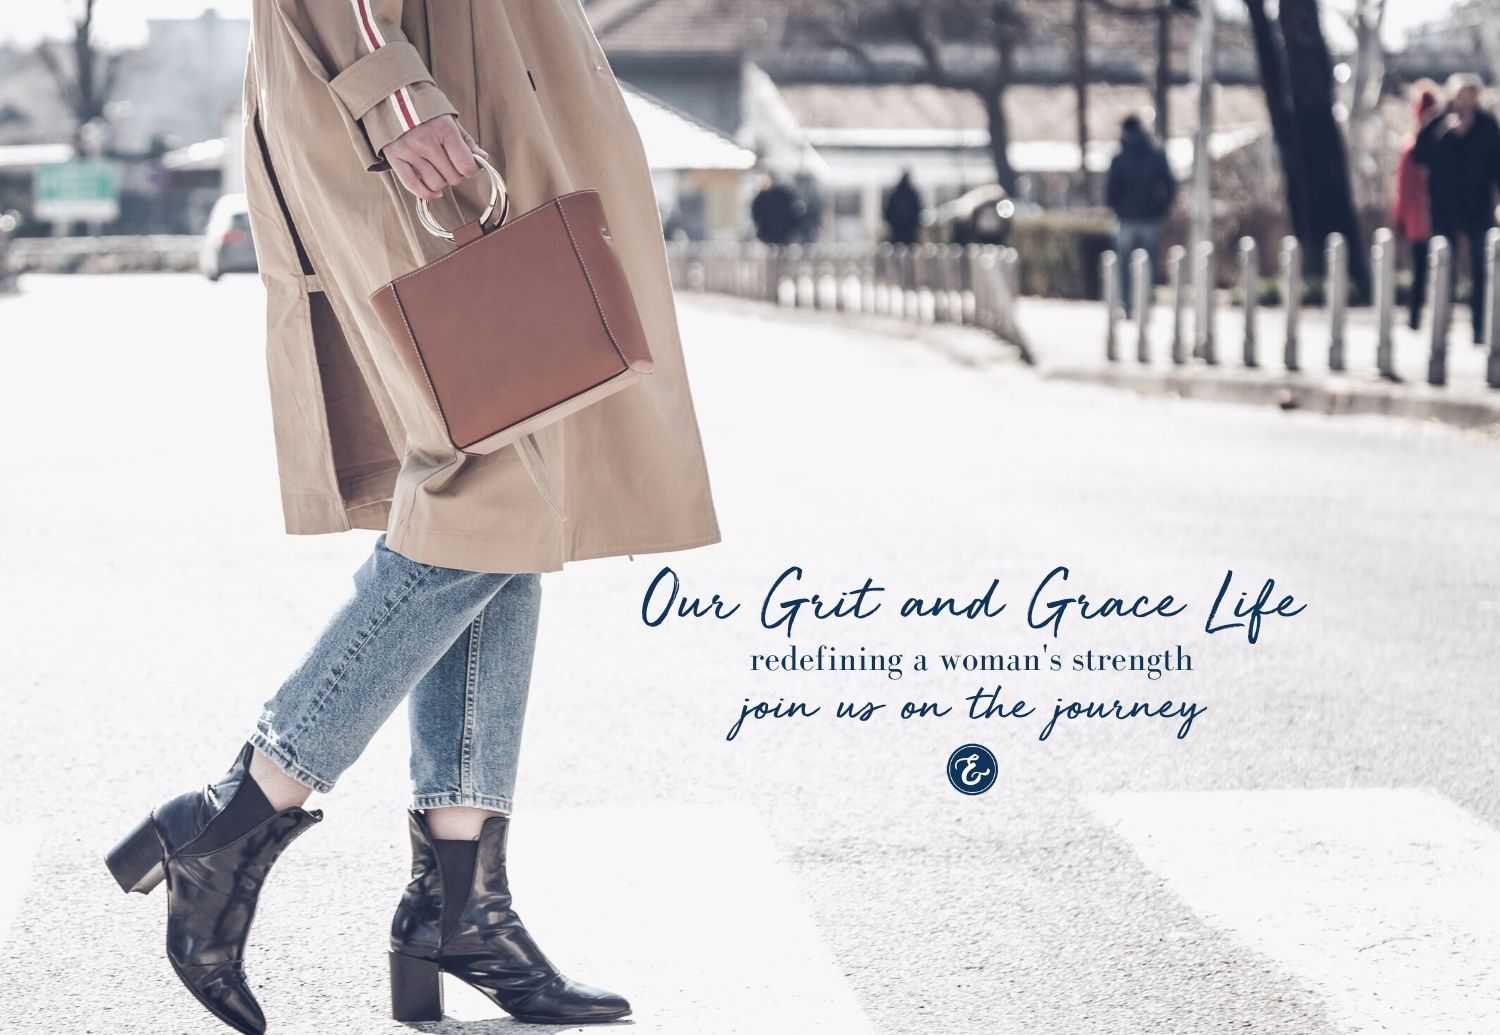 Support Grit and Grace Life